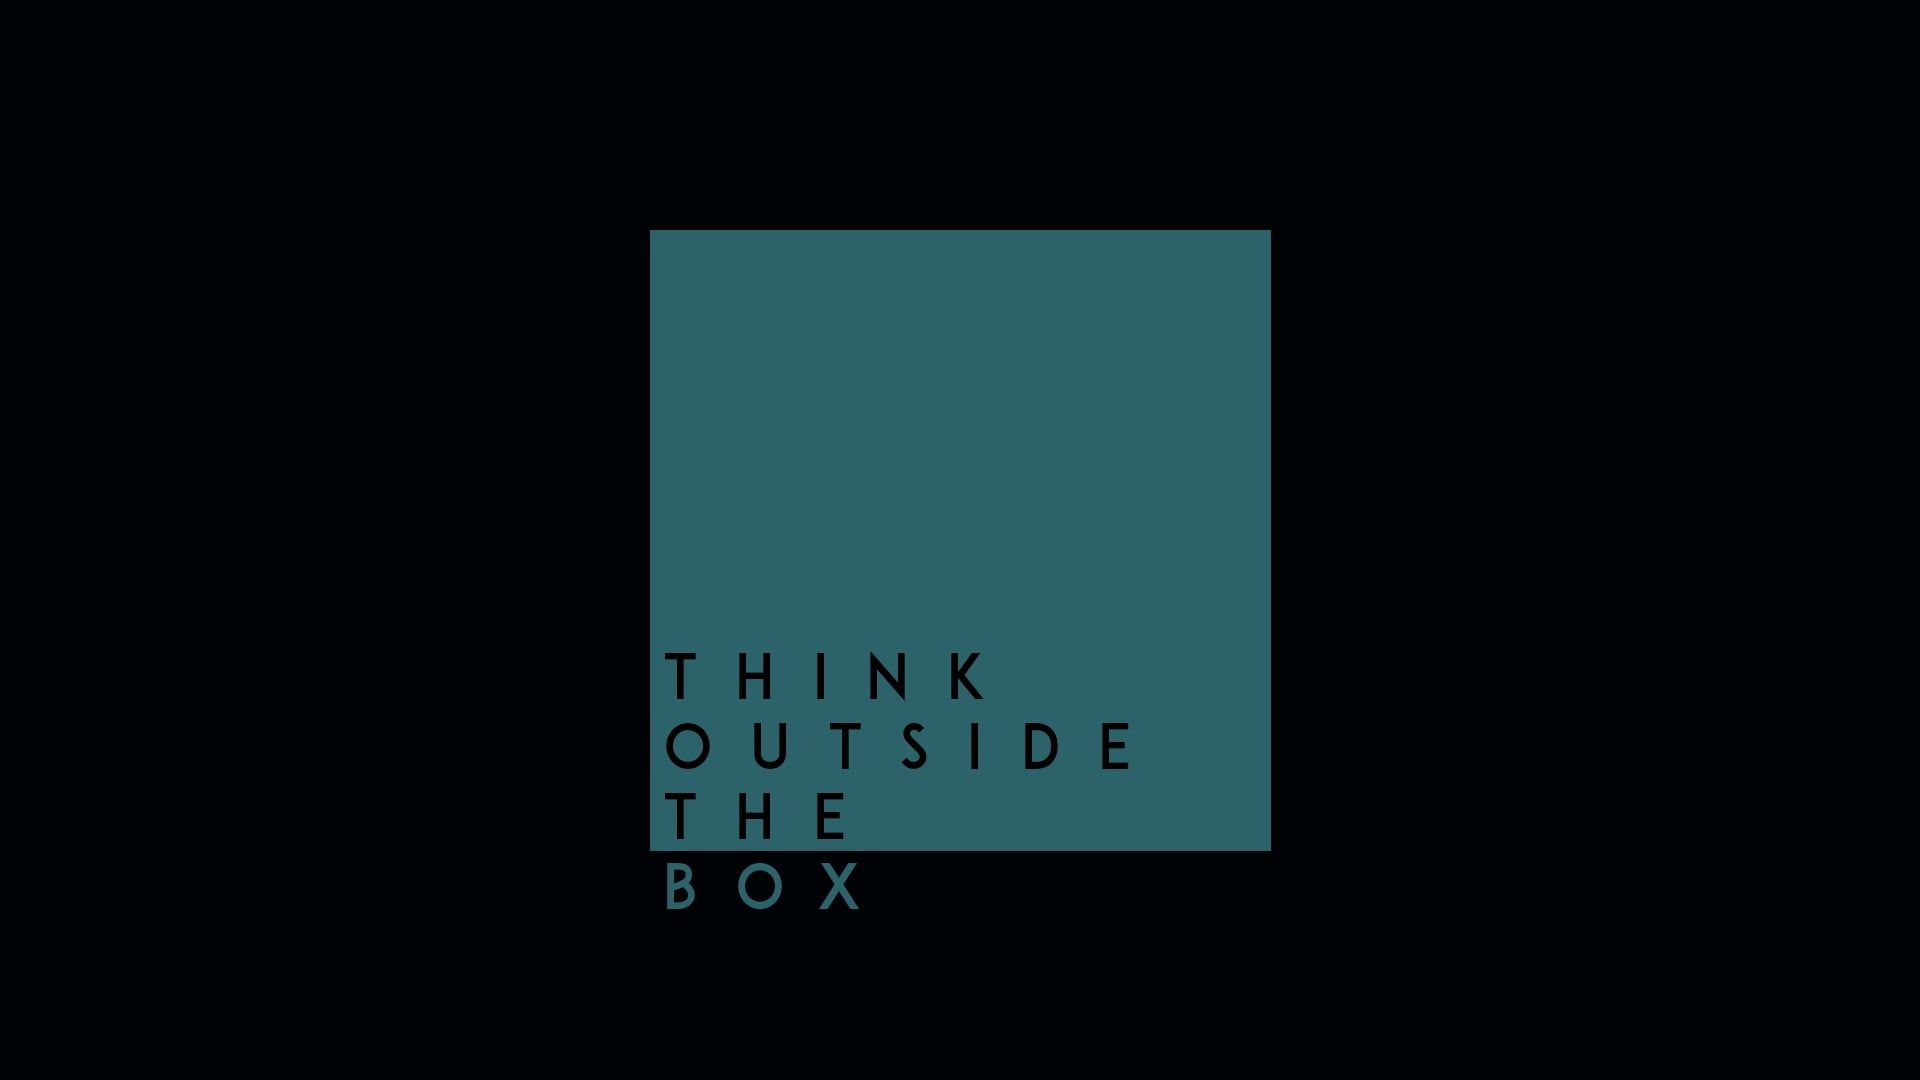 Think Outside The Box simple background #simple #motivational #quote #minimalism P #wallpaper #hdwa. Simple background, Motivation, Thinking outside